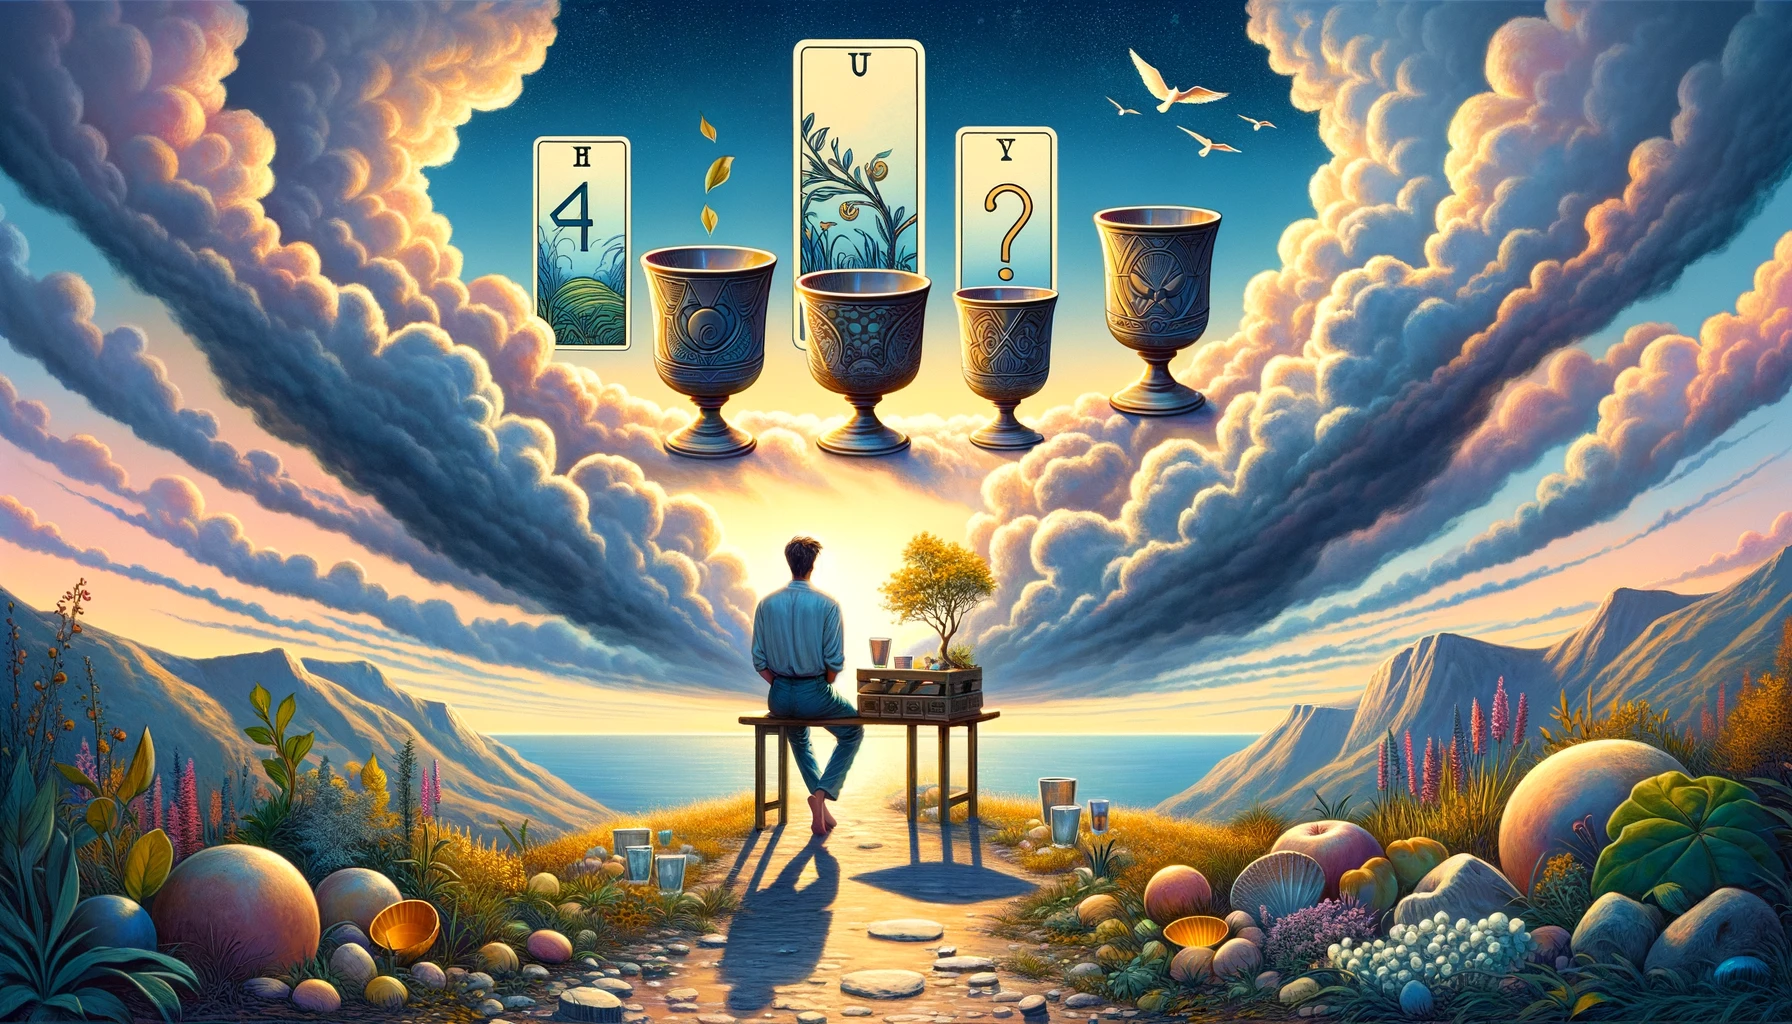 "An illustration depicting inner conflict and contemplation, featuring a figure in introspection surrounded by three cups representing current achievements or relationships, while a fourth cup symbolizes an unseen opportunity being offered. The setting exudes a sense of reflection, suggesting the individual's internal deliberation over desires and the potential for change. Despite themes of hesitation, subtle elements within the image hint at the possibility of realization and the embrace of new prospects, indicating a journey towards finding balance and fulfillment."